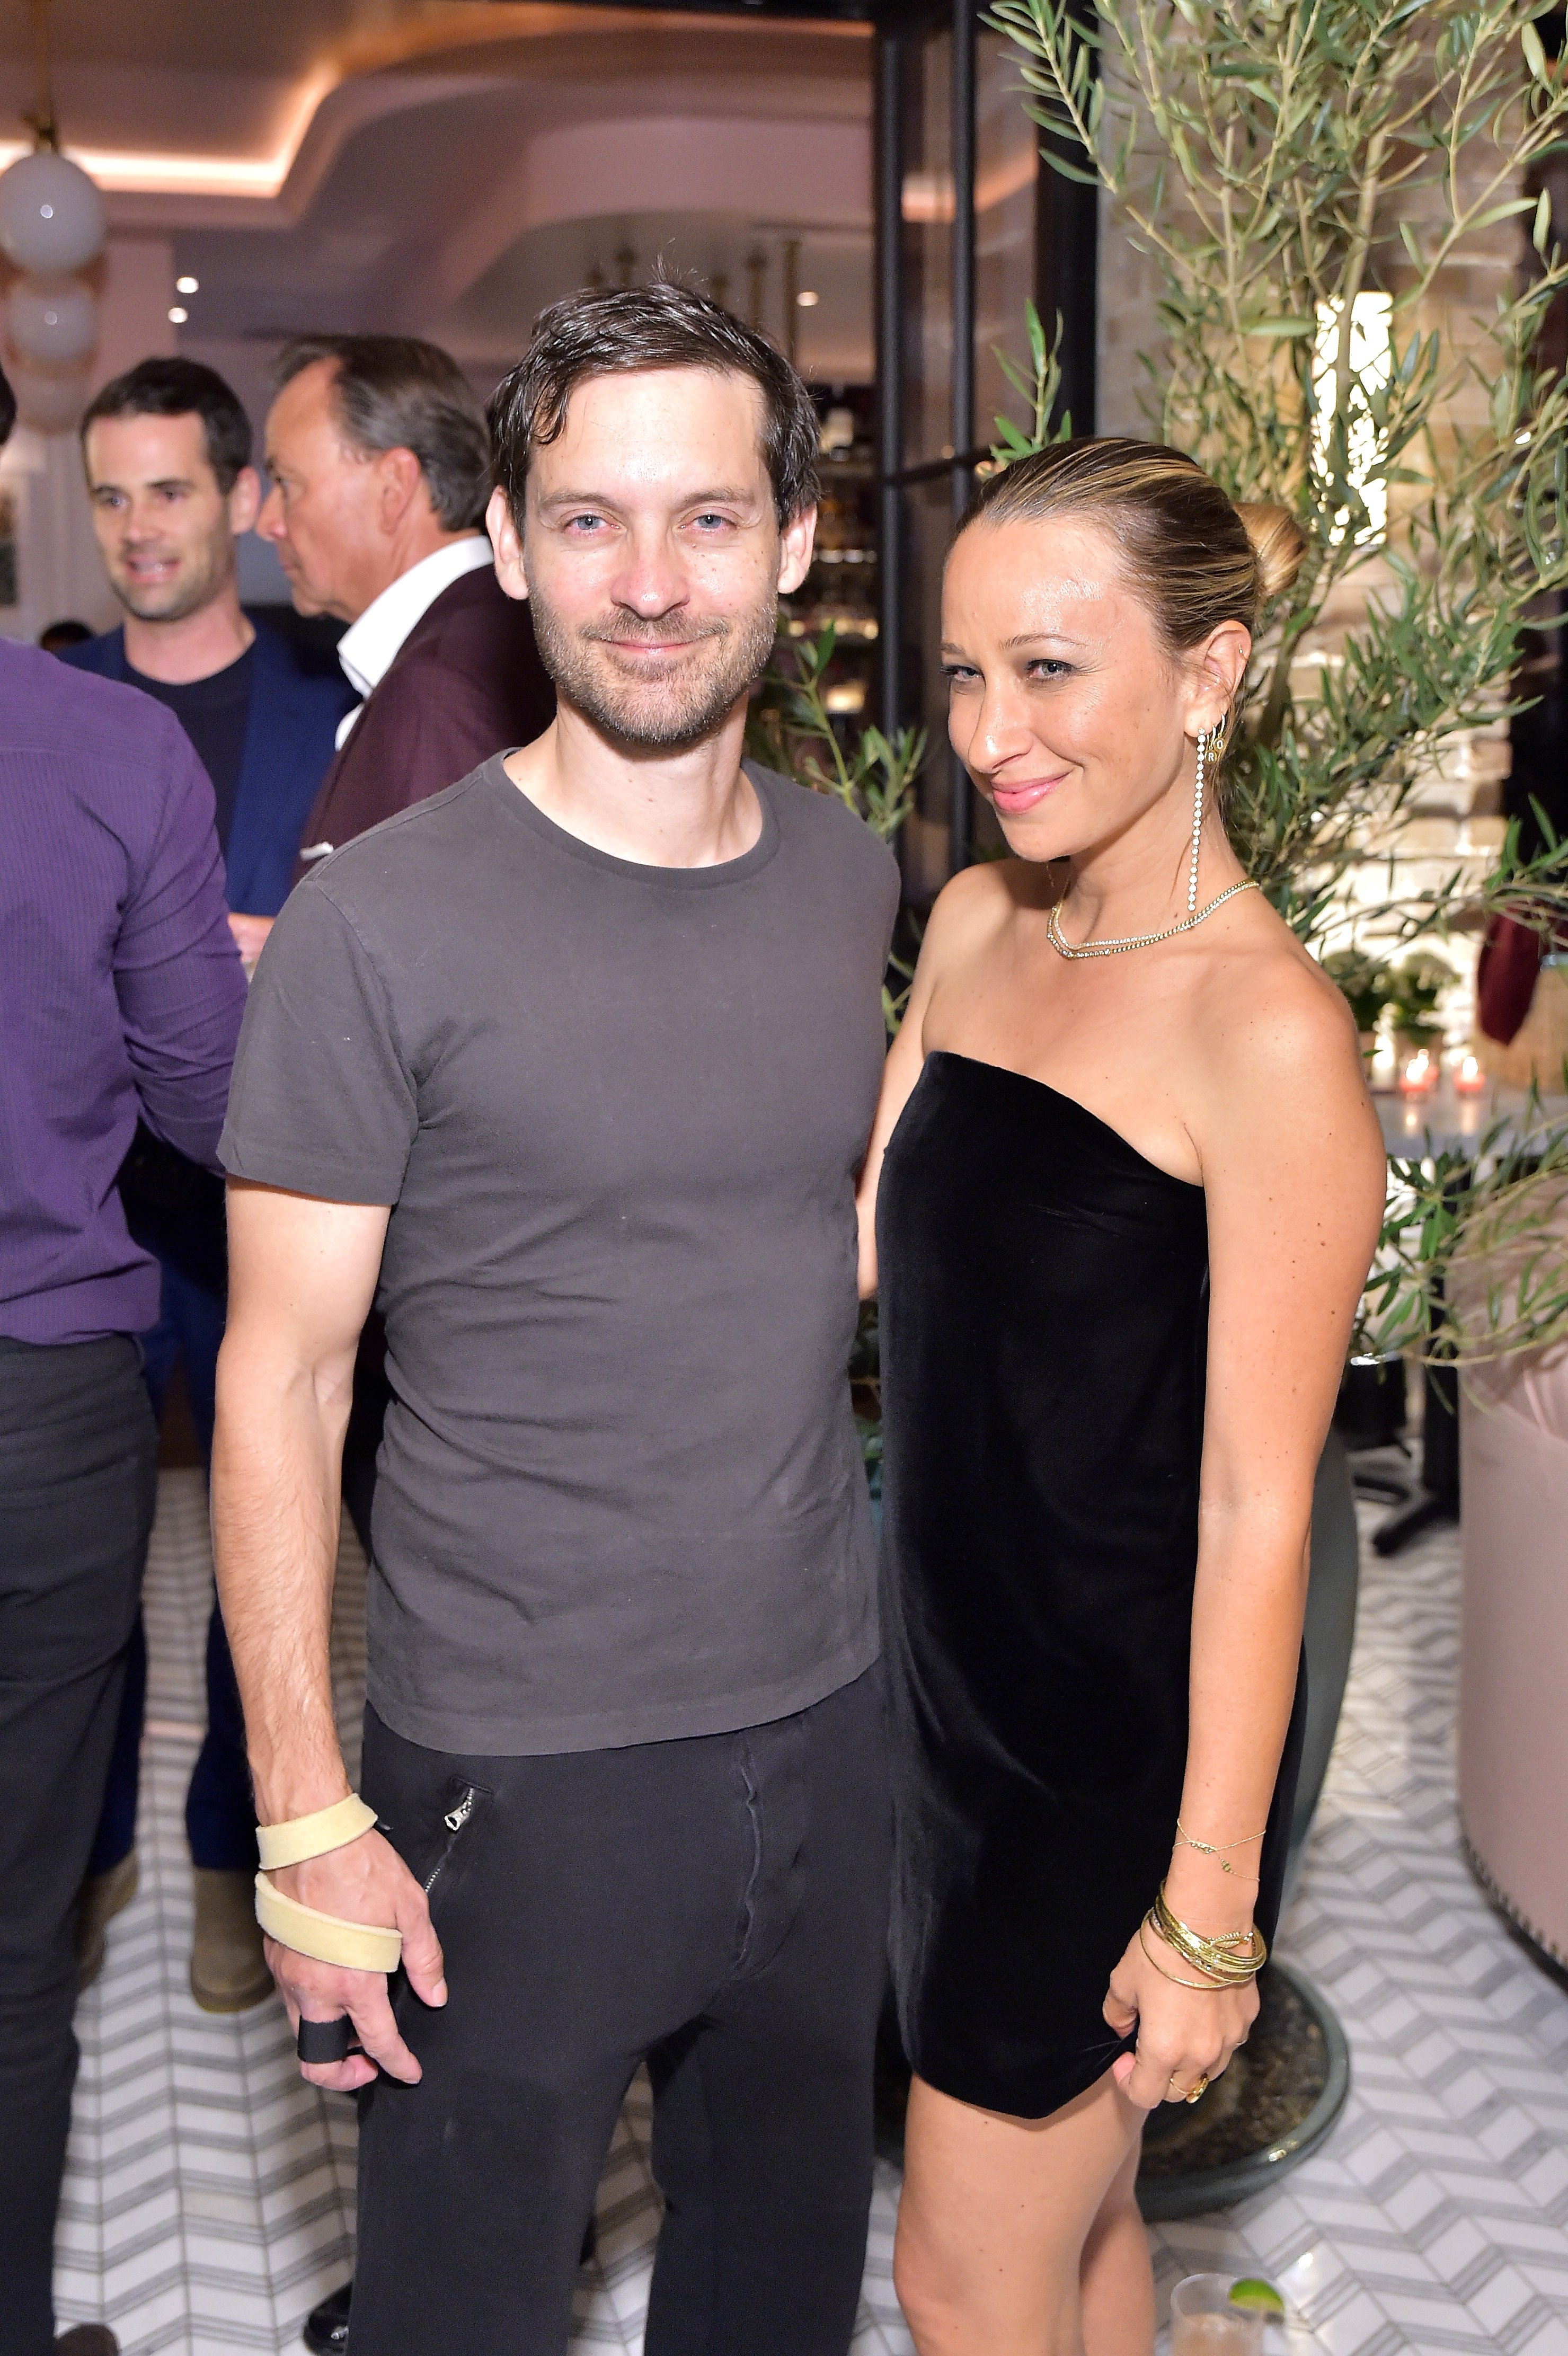 Tobey Maguire attend Jennifer Meyer's celebration of her first store opening in Palisades Village on October 17, 2018 in Pacific Palisades, California.  | Source: Getty Images